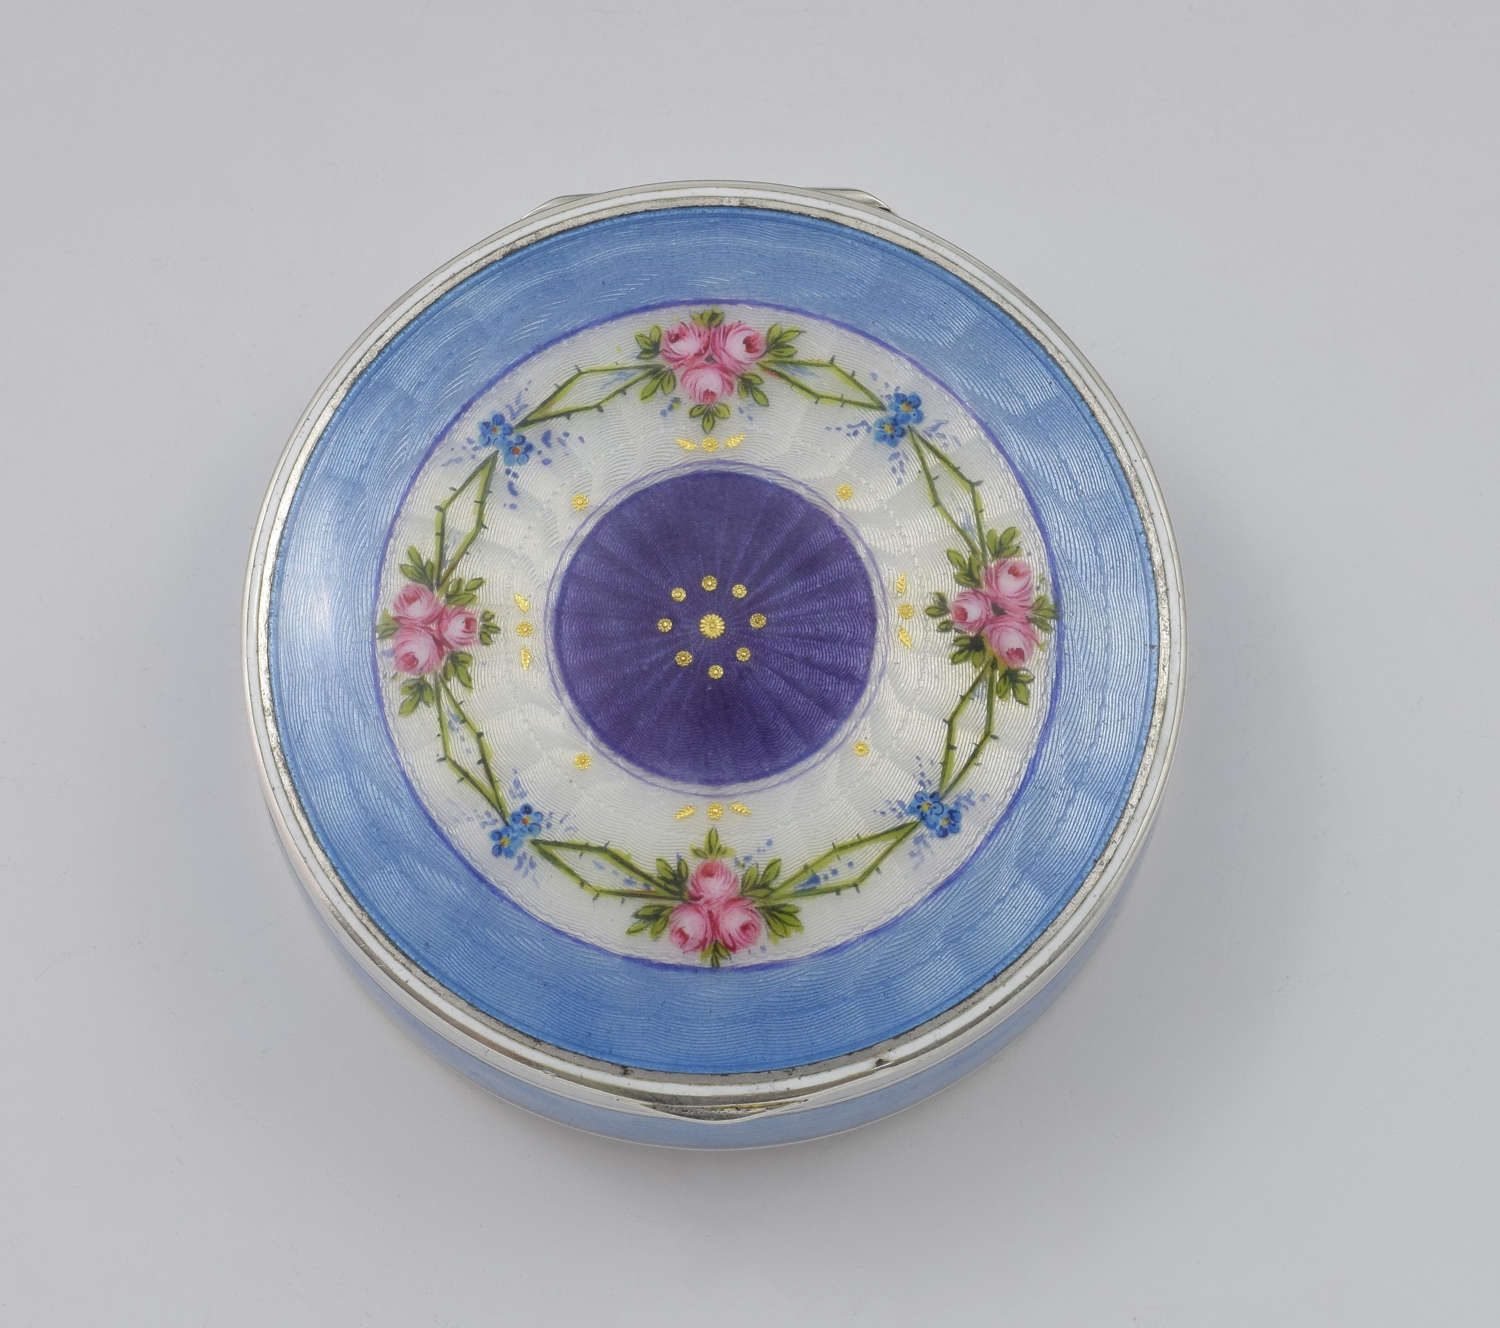 German Silver & Guilloche Enamel Box With Painted Flowers C.1920